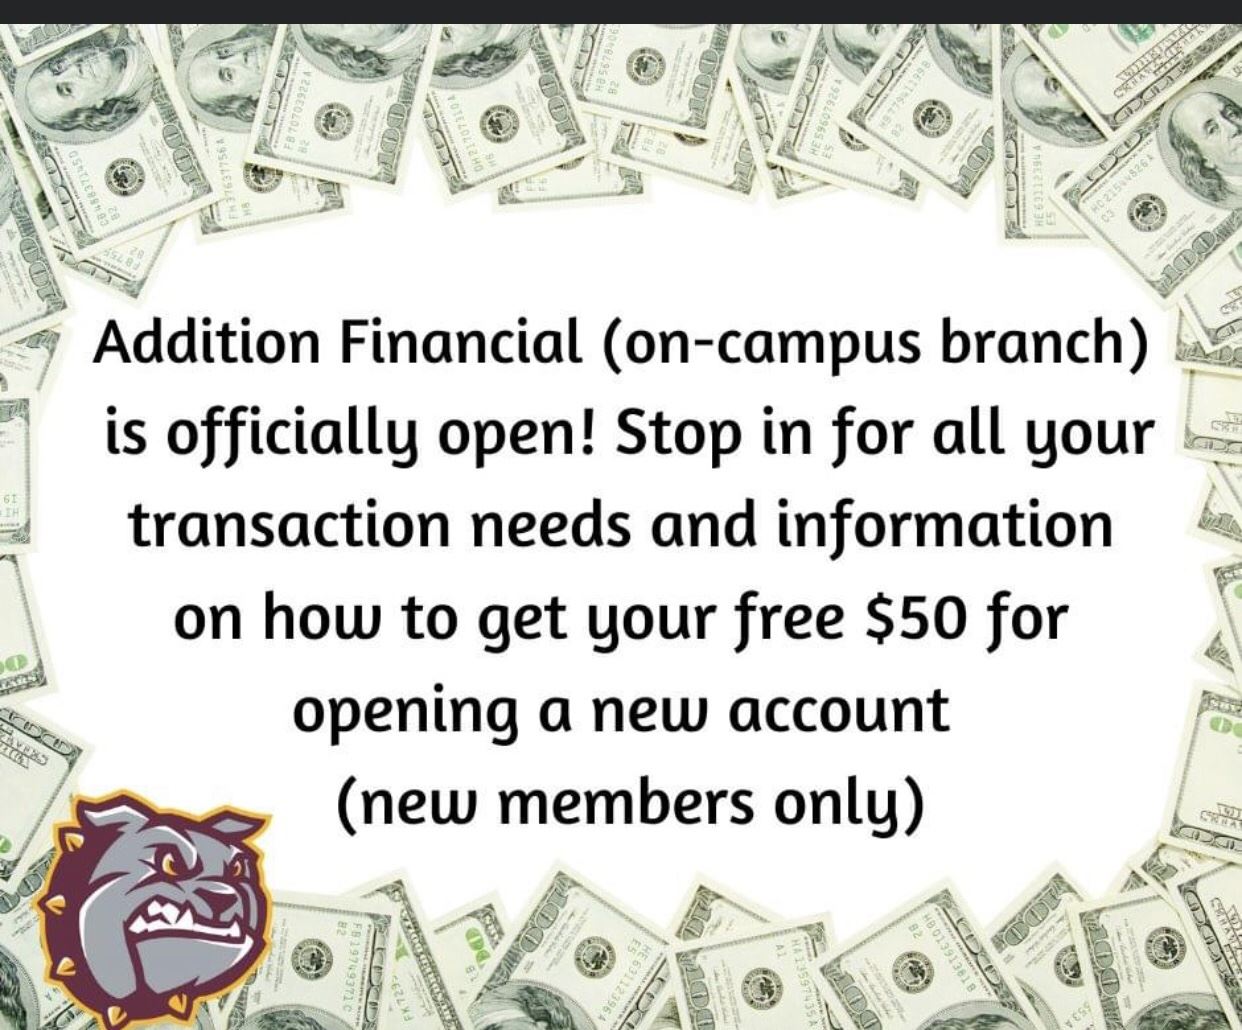  Flyer that says Additional Financial is open